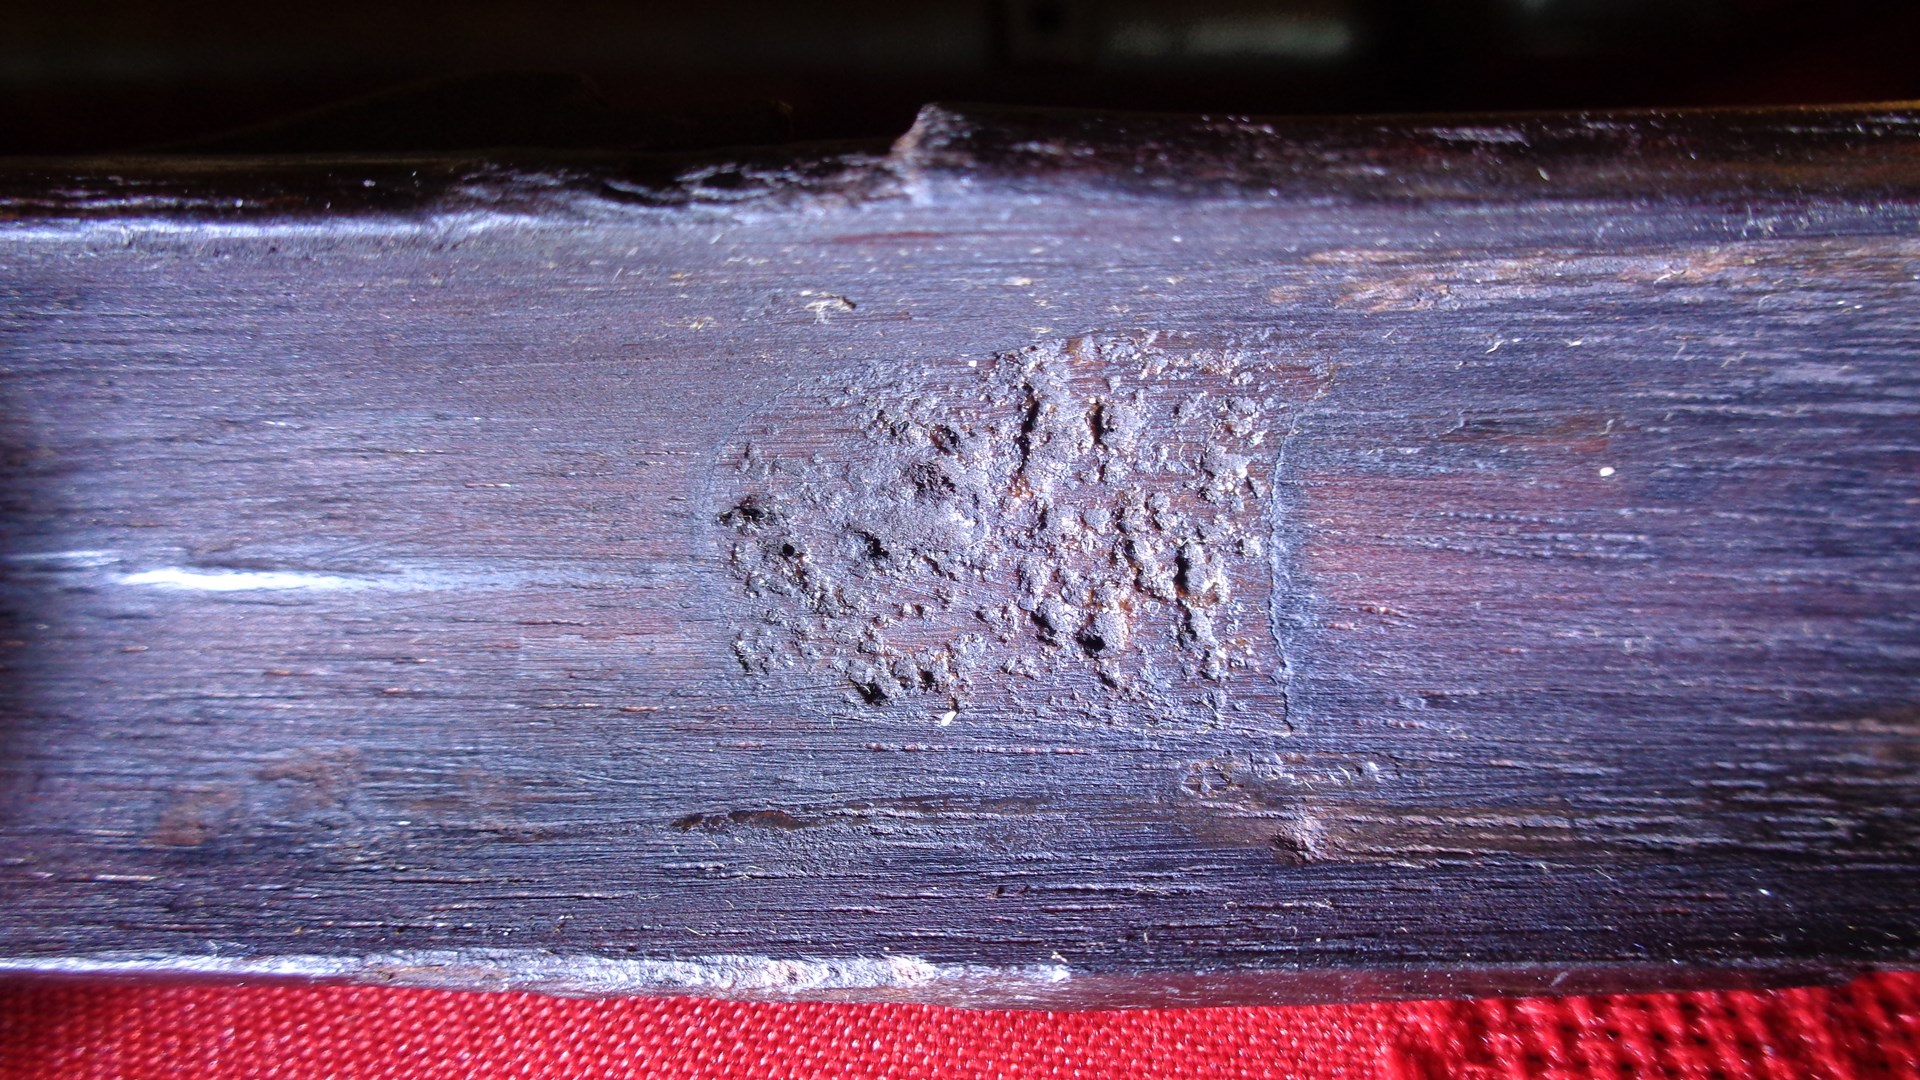 The little rectangle of disintegrating paper (with the initials “JH” on it) had been glued in the rifle stock’s barrel channel on an area that, over time, had deteriorated from the bacteria in the animal hide glue. When first noticed, it was mistaken for a splice block. Image courtesy of author.